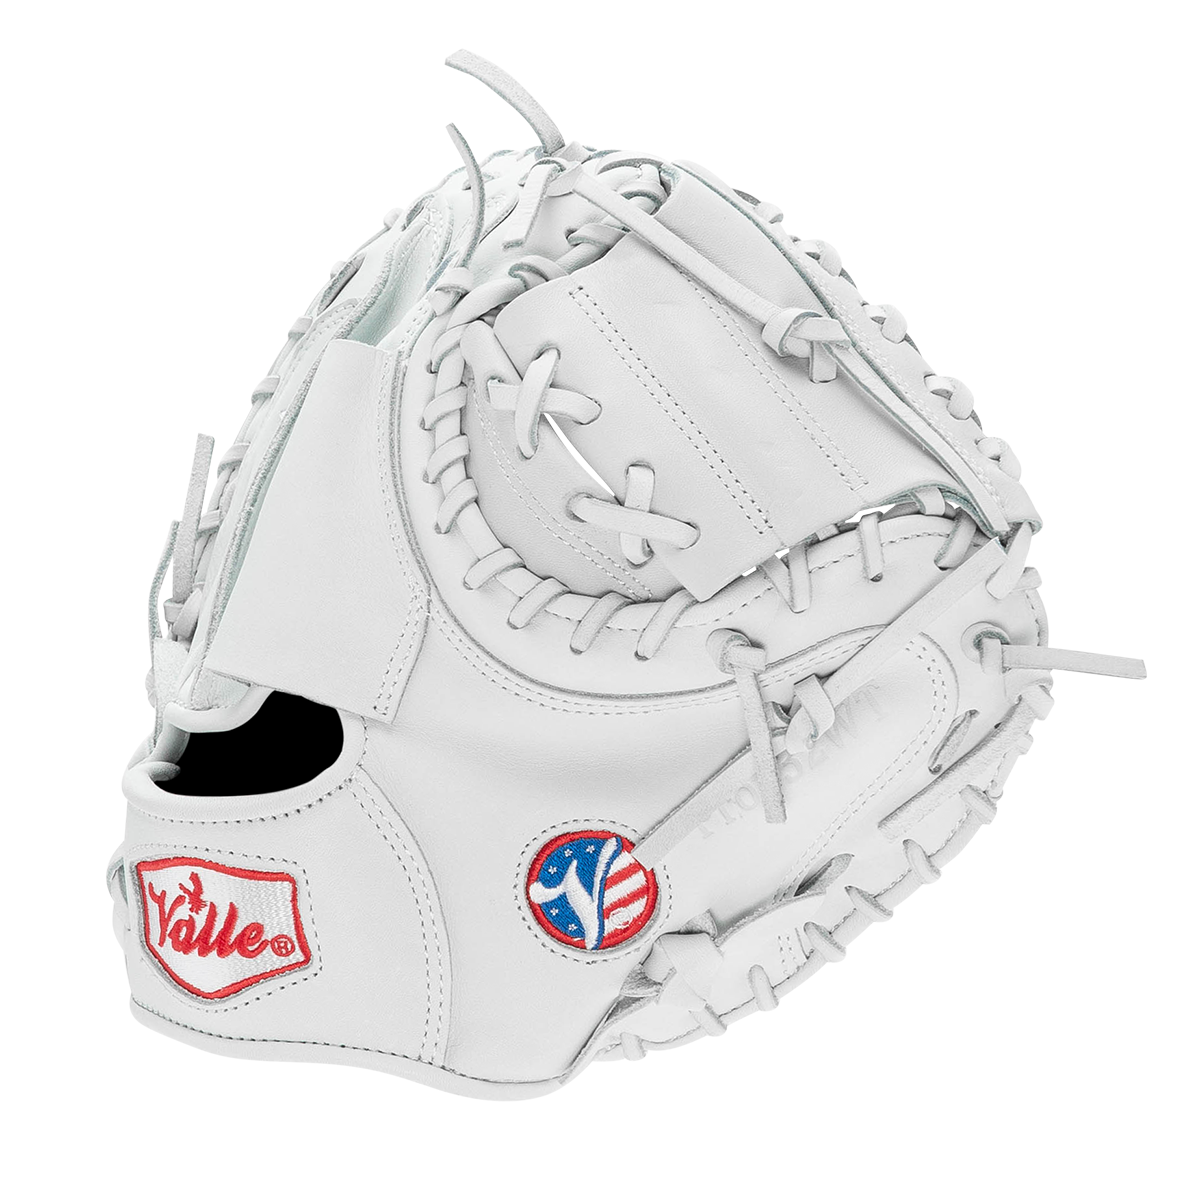 Eagle 32WT Weighted Mitt